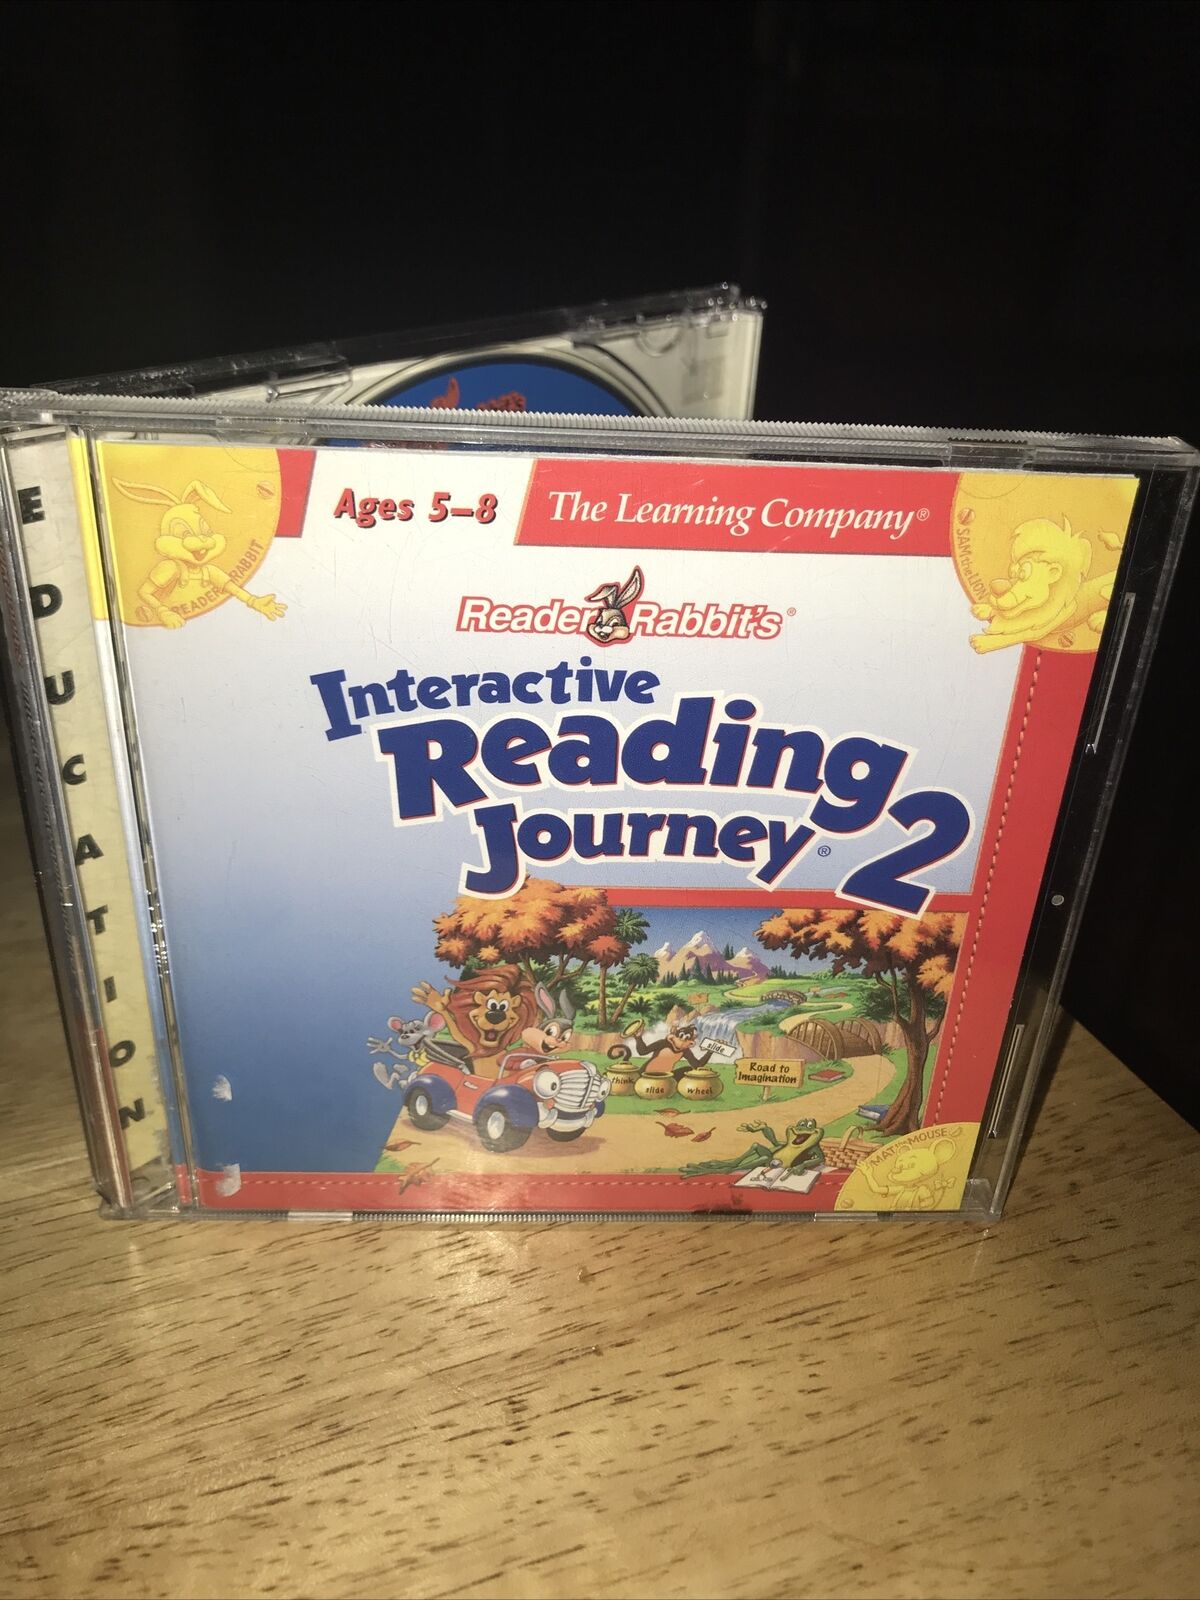 The Learning Company Reader Rabbit's Interactive Reading Journey 2 for PC, Mac